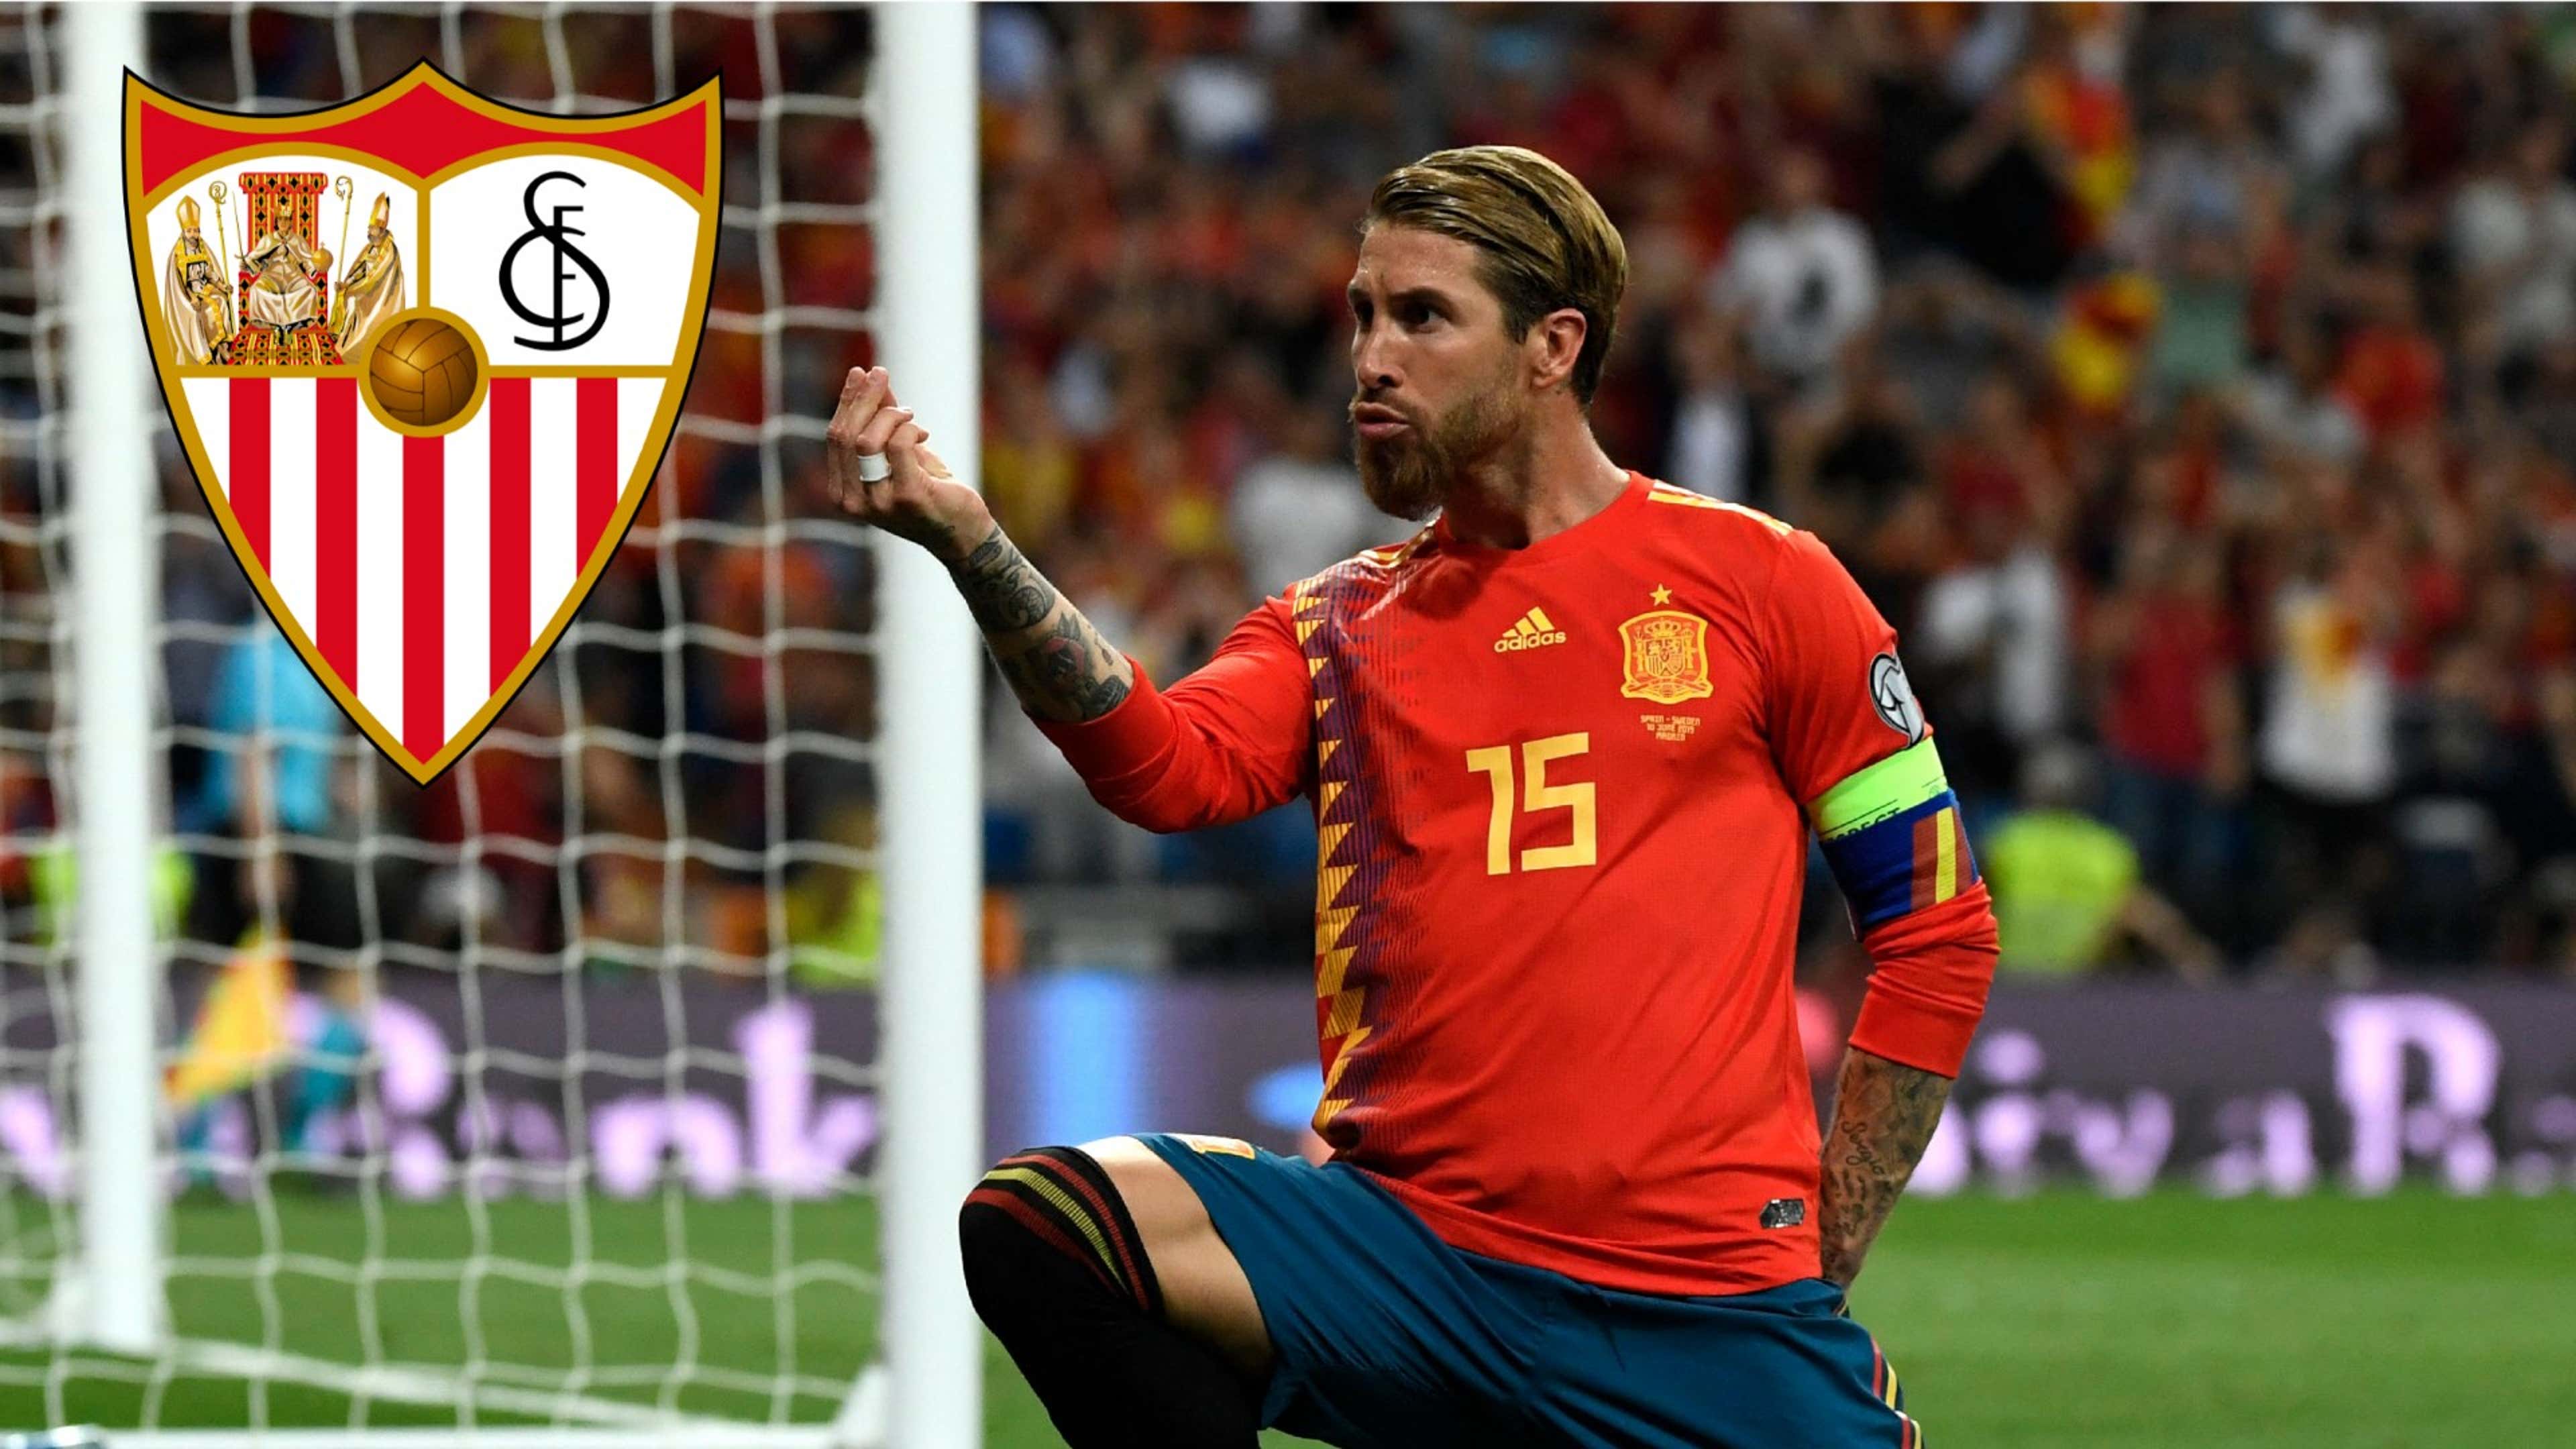 I'm finally coming home' - Sergio Ramos officially unveiled as new Sevilla  player 18 years after leaving